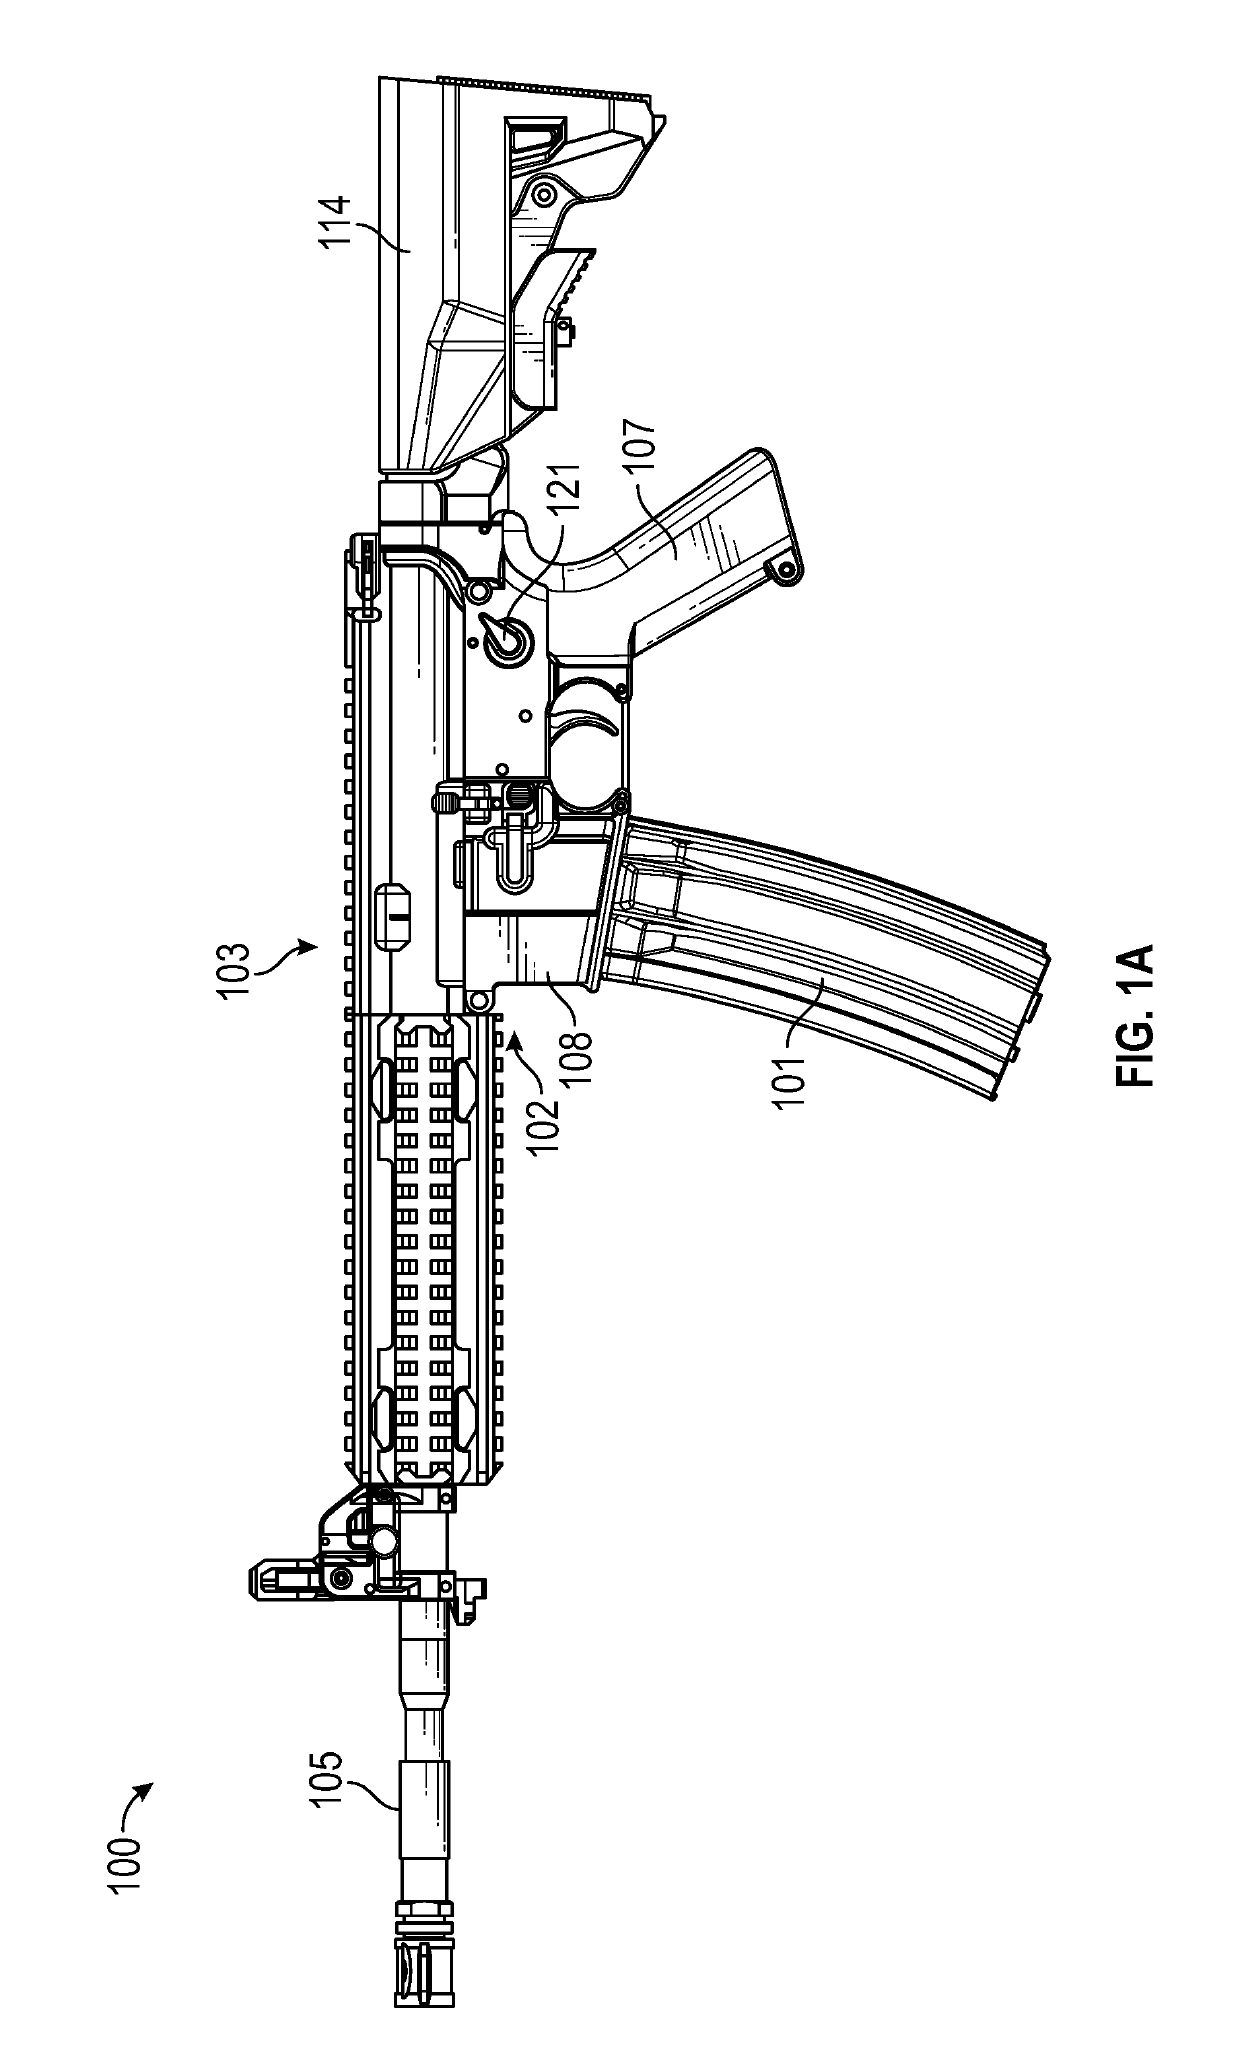 Selective fire firearm systems and methods